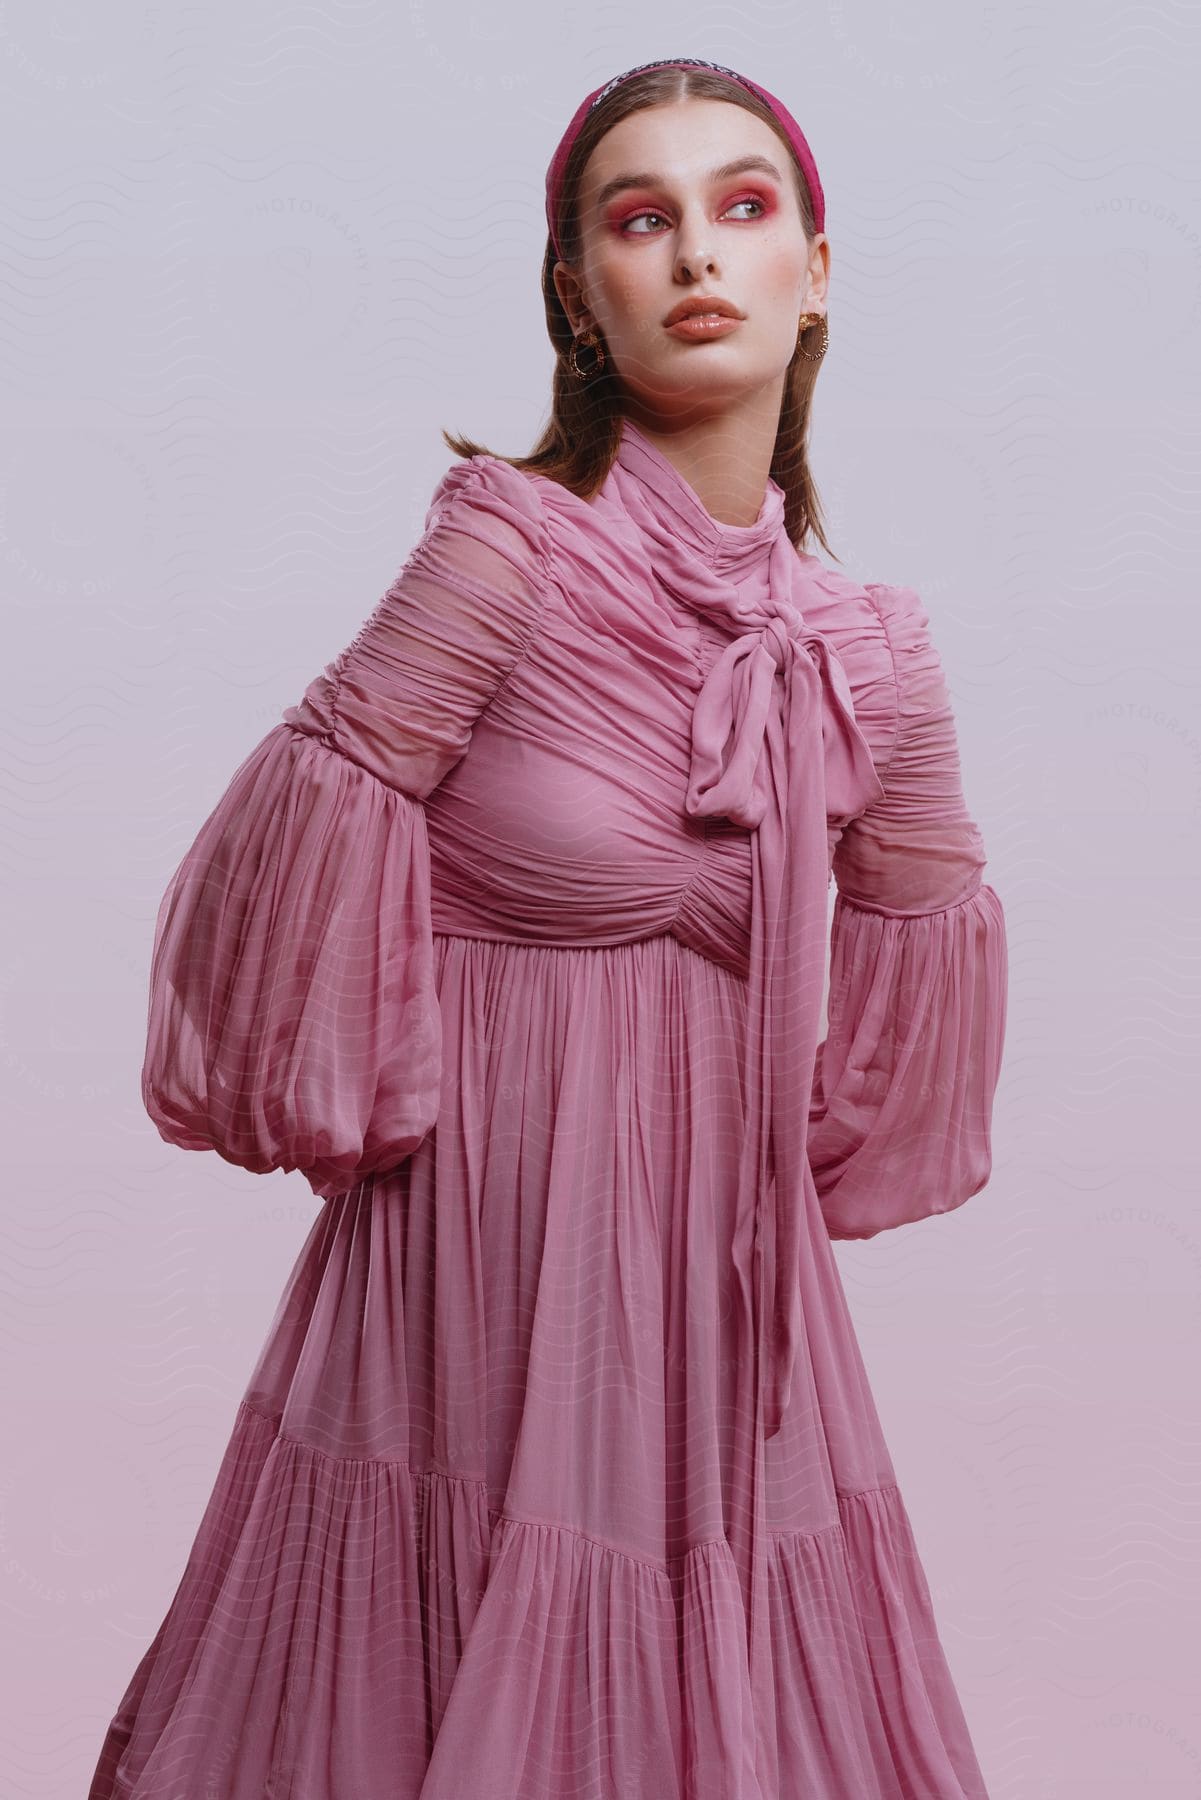 A woman models a pink pleated and ruched dress